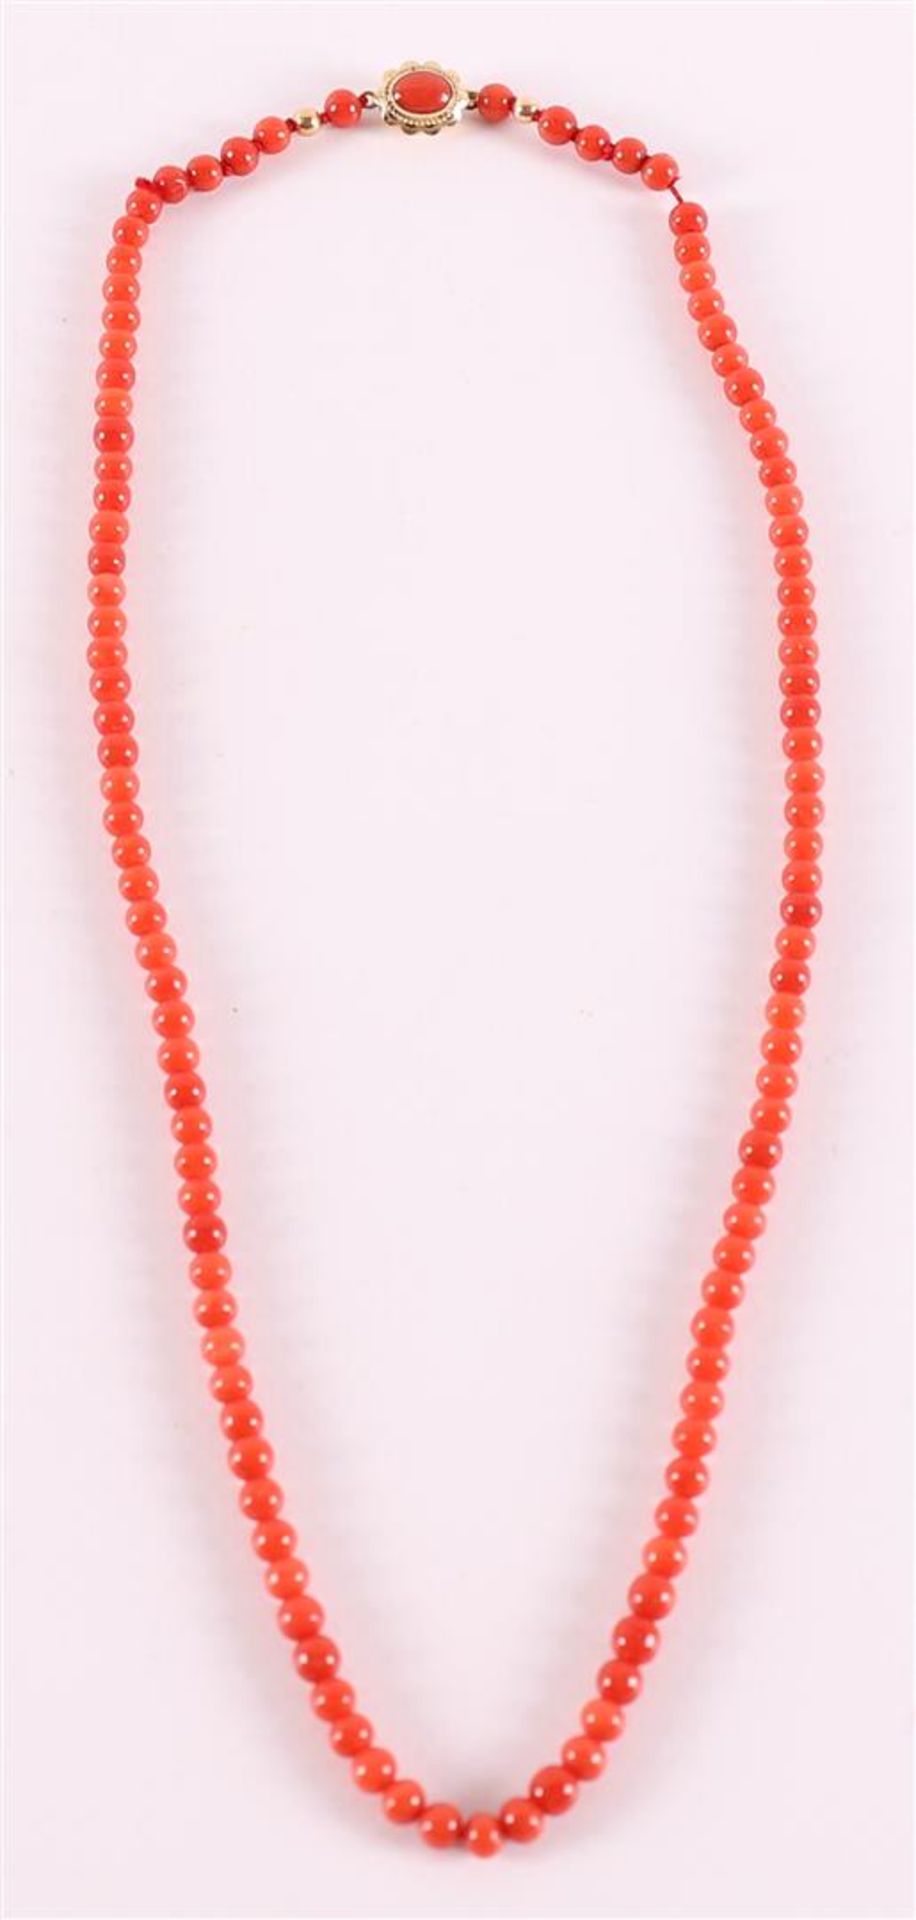 A necklace of red coral and a 14 carat gold lock with a red coral and gold.